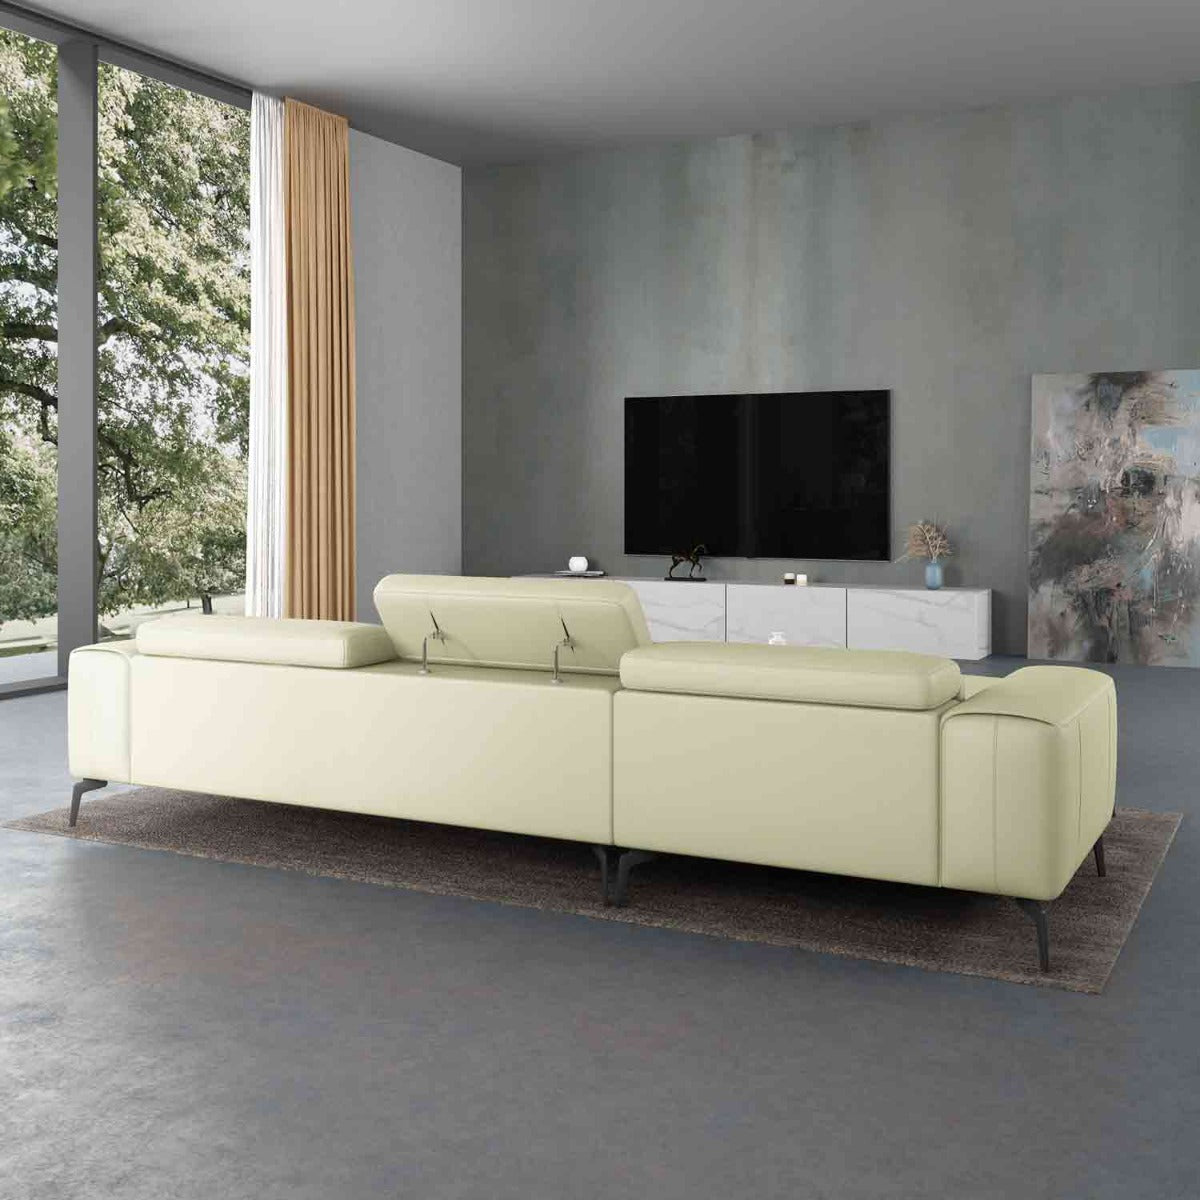 European Furniture - Cavour Left Hand Facing Sectional In off White - 12557L-3LHF - New Star Living